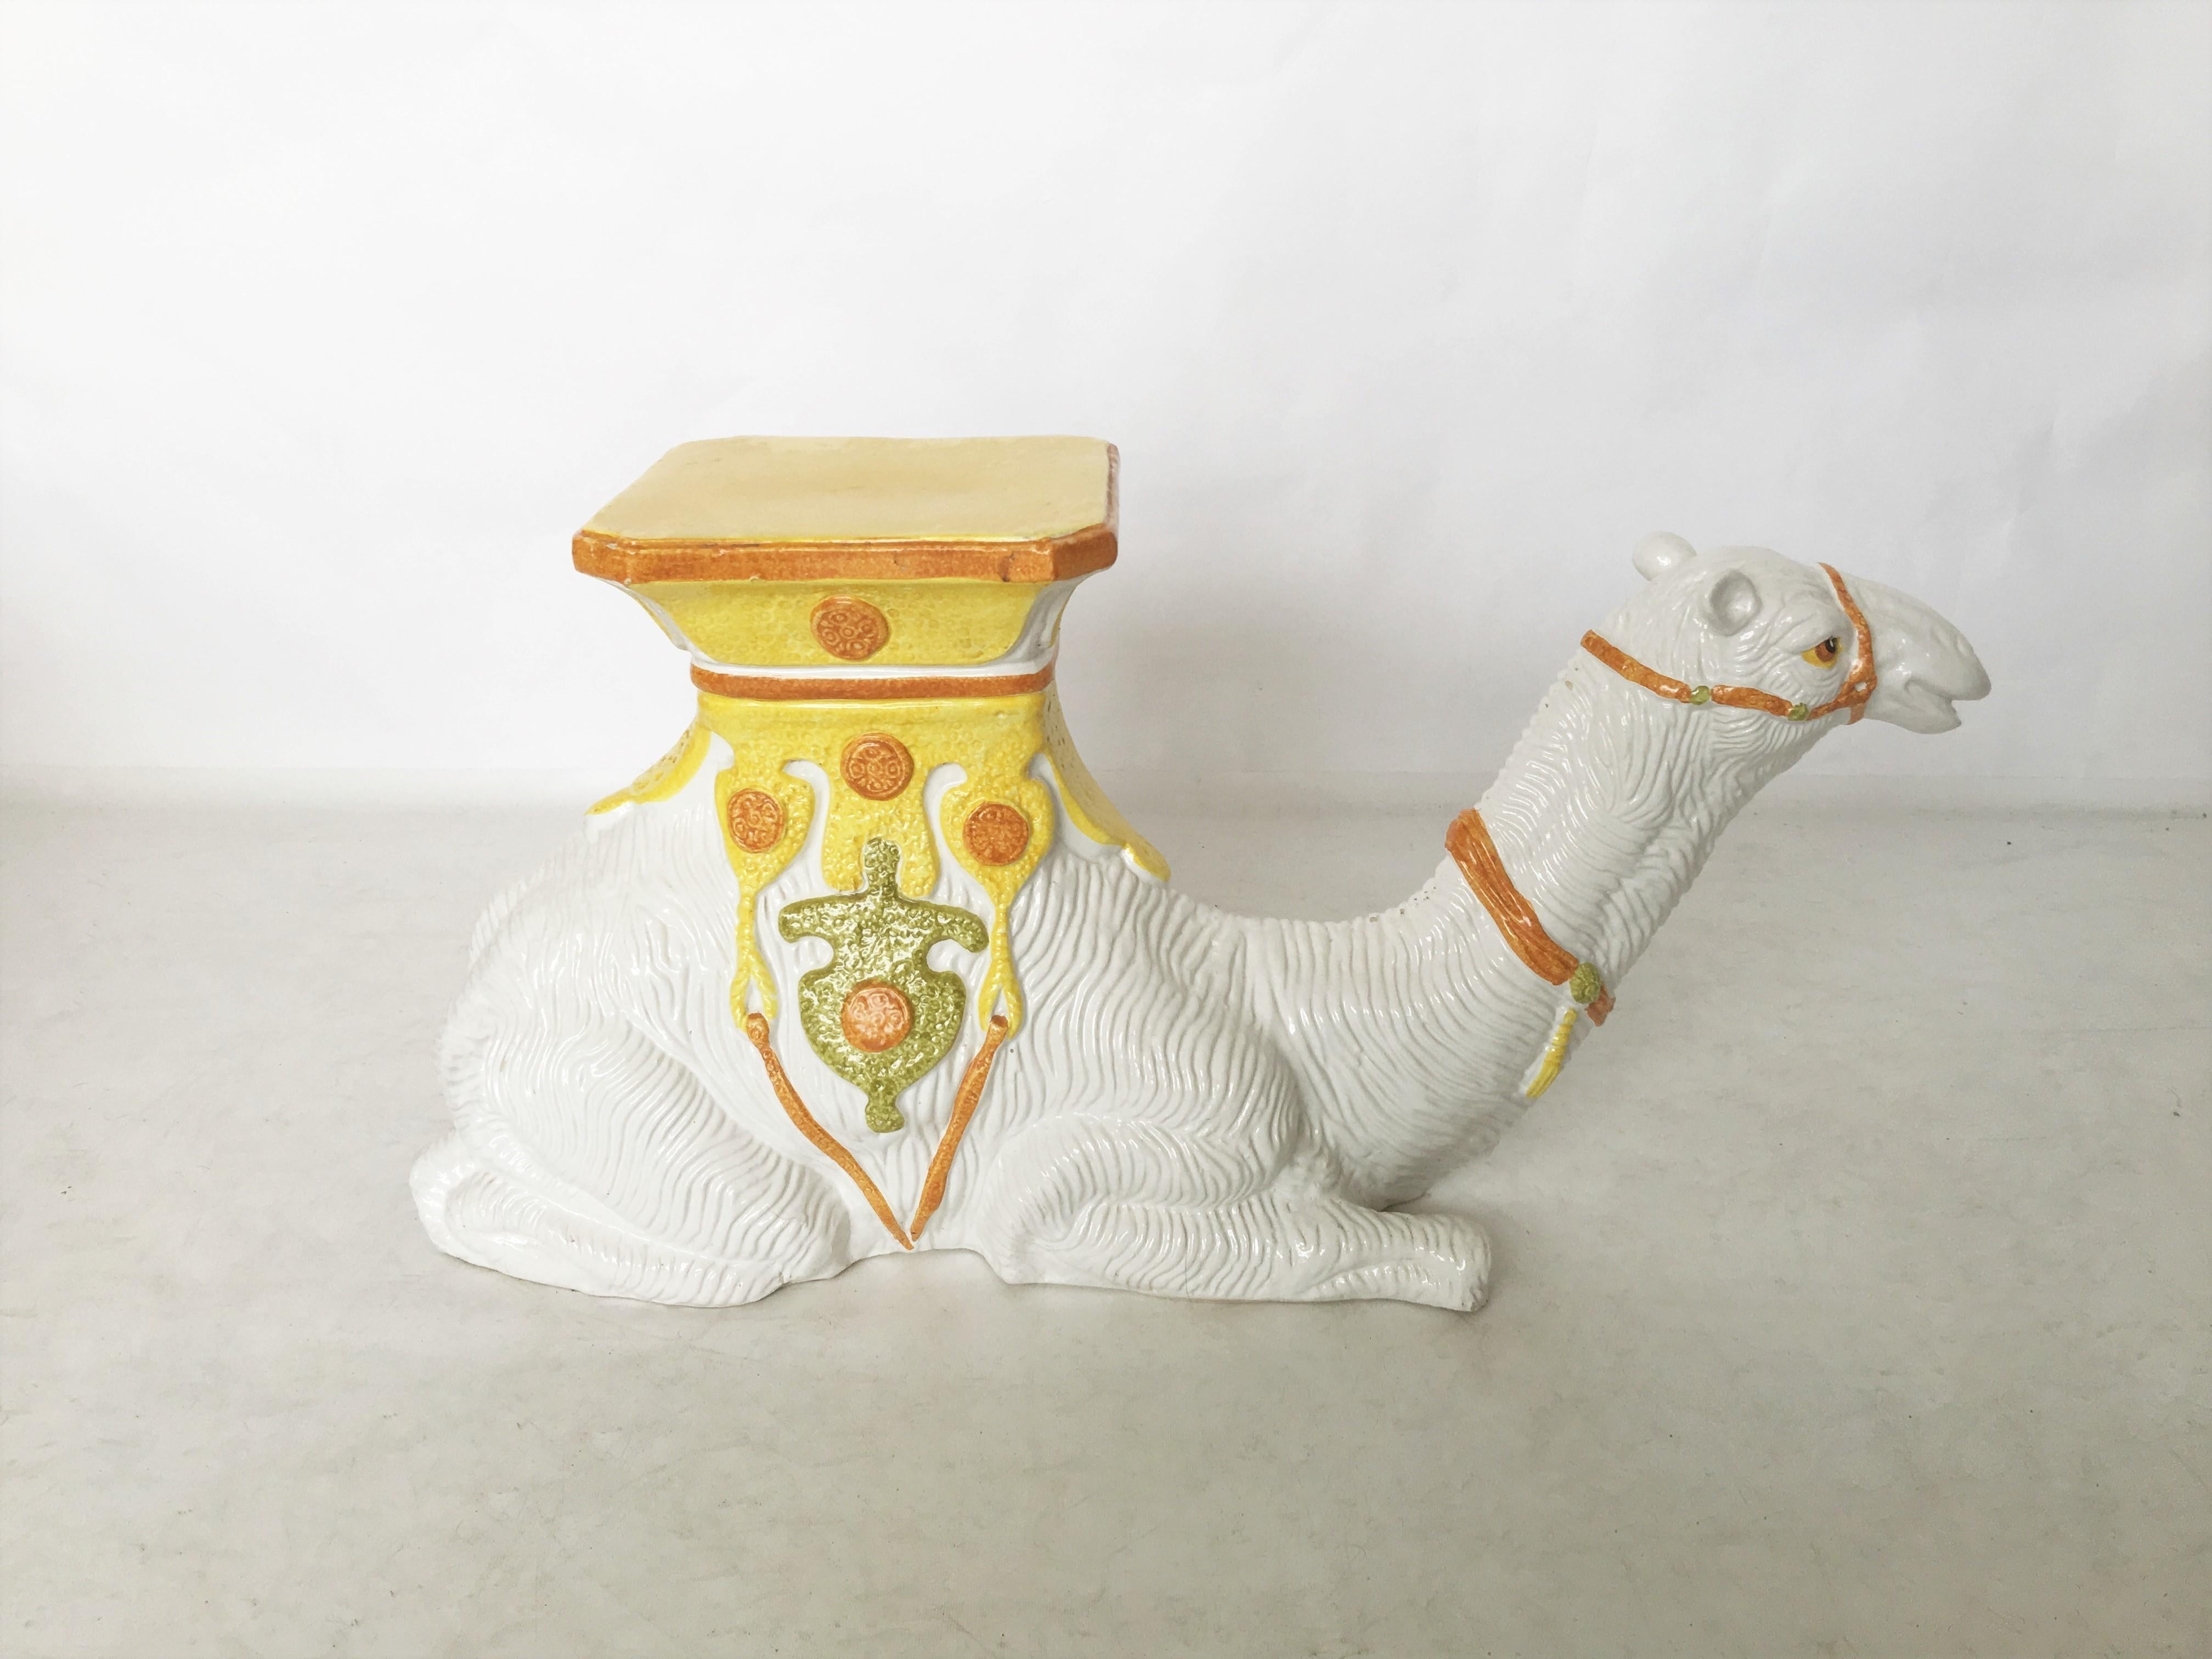 Charming vintage hand painted Italian majolica sitting hump camel side table or garden seat. Between its humps is a decorative saddle with yellow, orange and green details. Works well as a side table or even a plant stand.